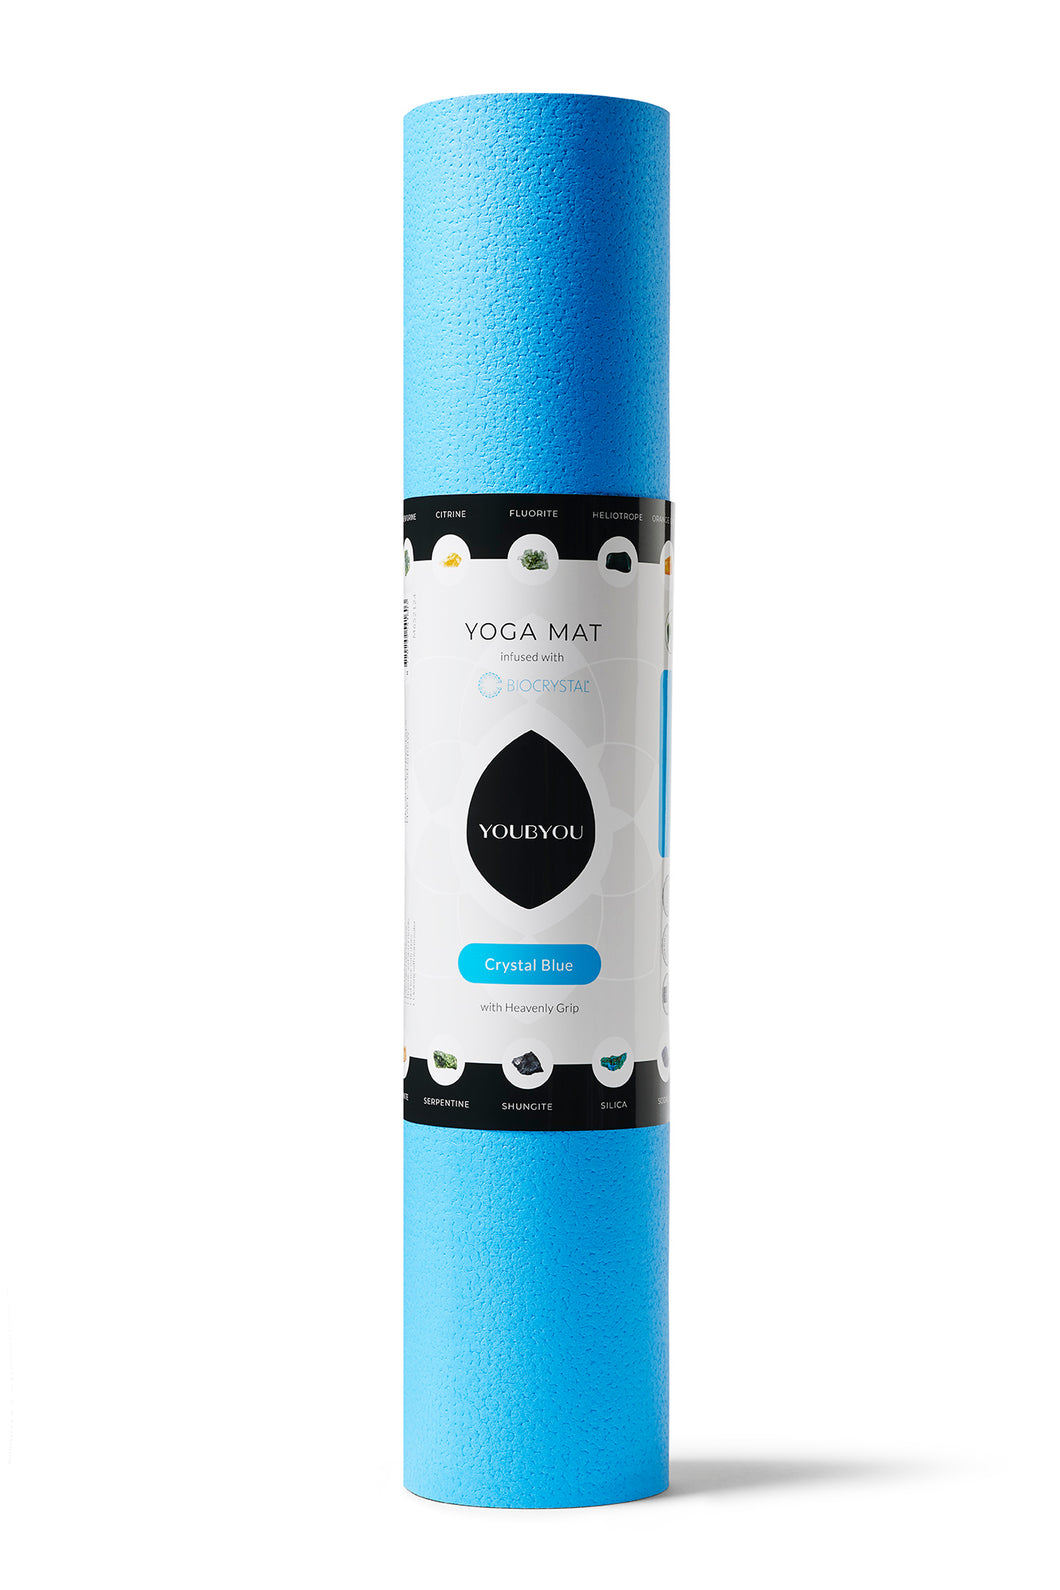 Yoga mat infused with Biocrystal®; a powder of 16 different crystals selected for their strong relaxing effect on Body & Mind.